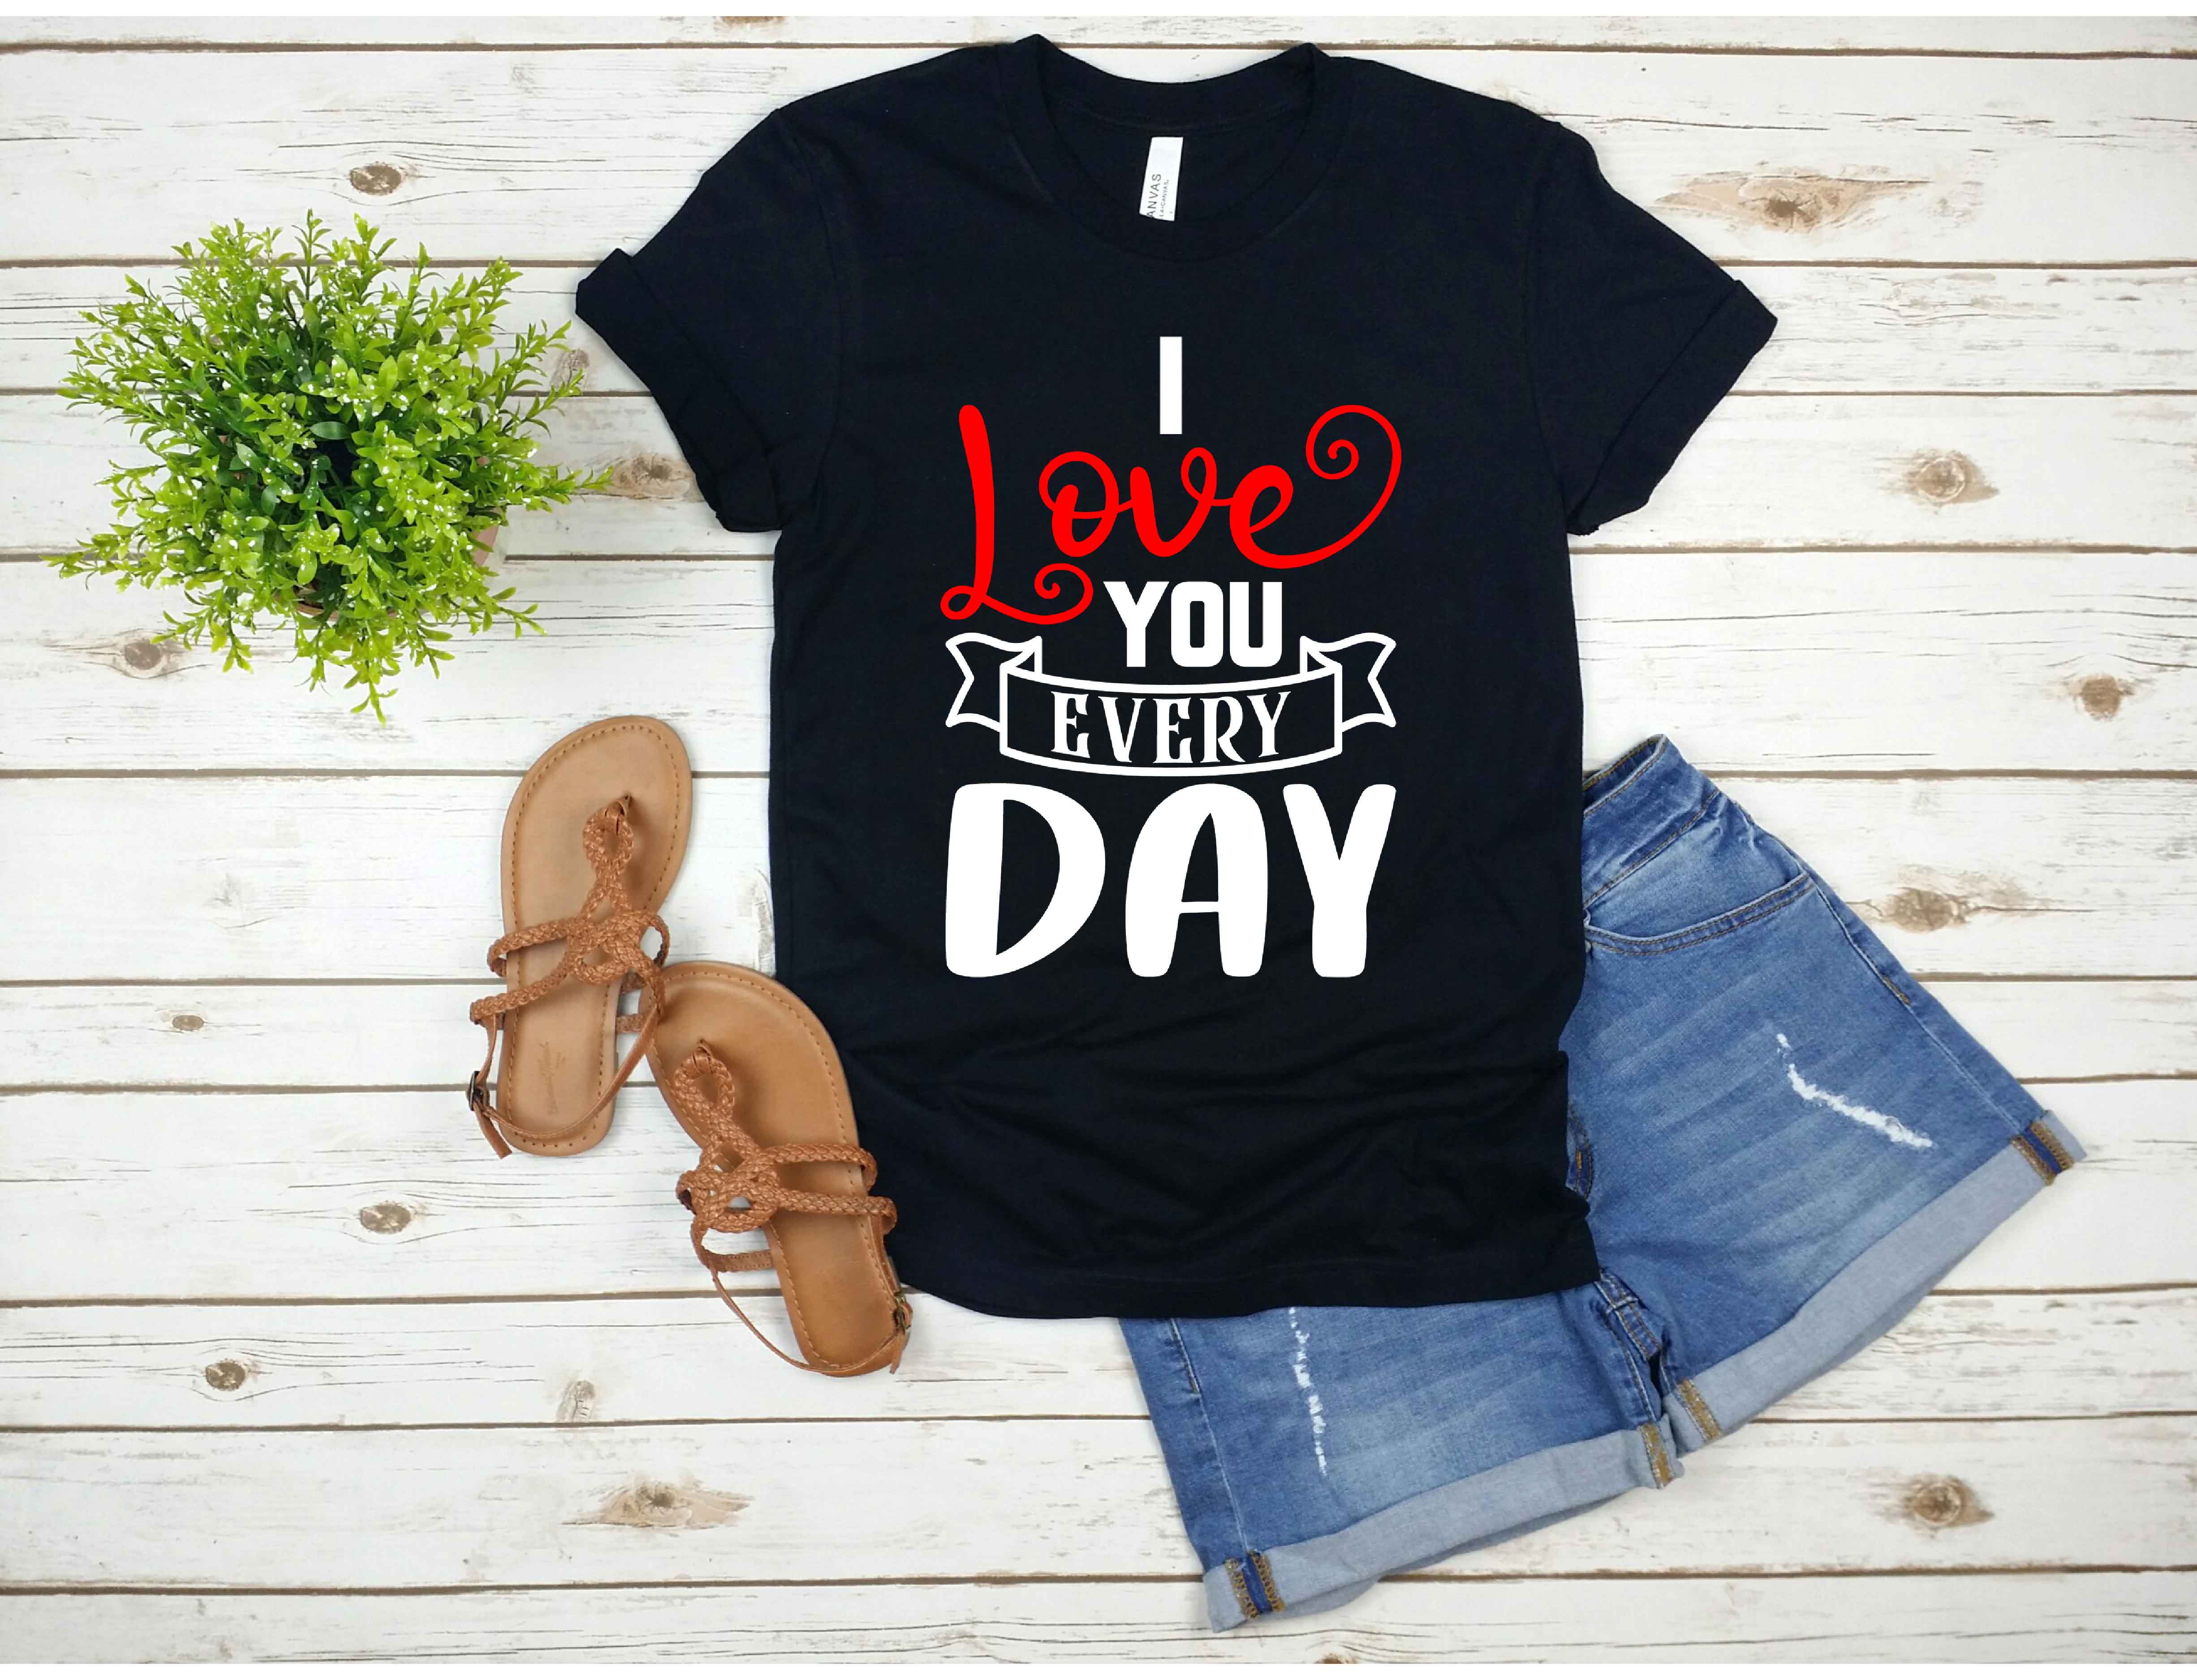 T - shirt that says i love you every day.